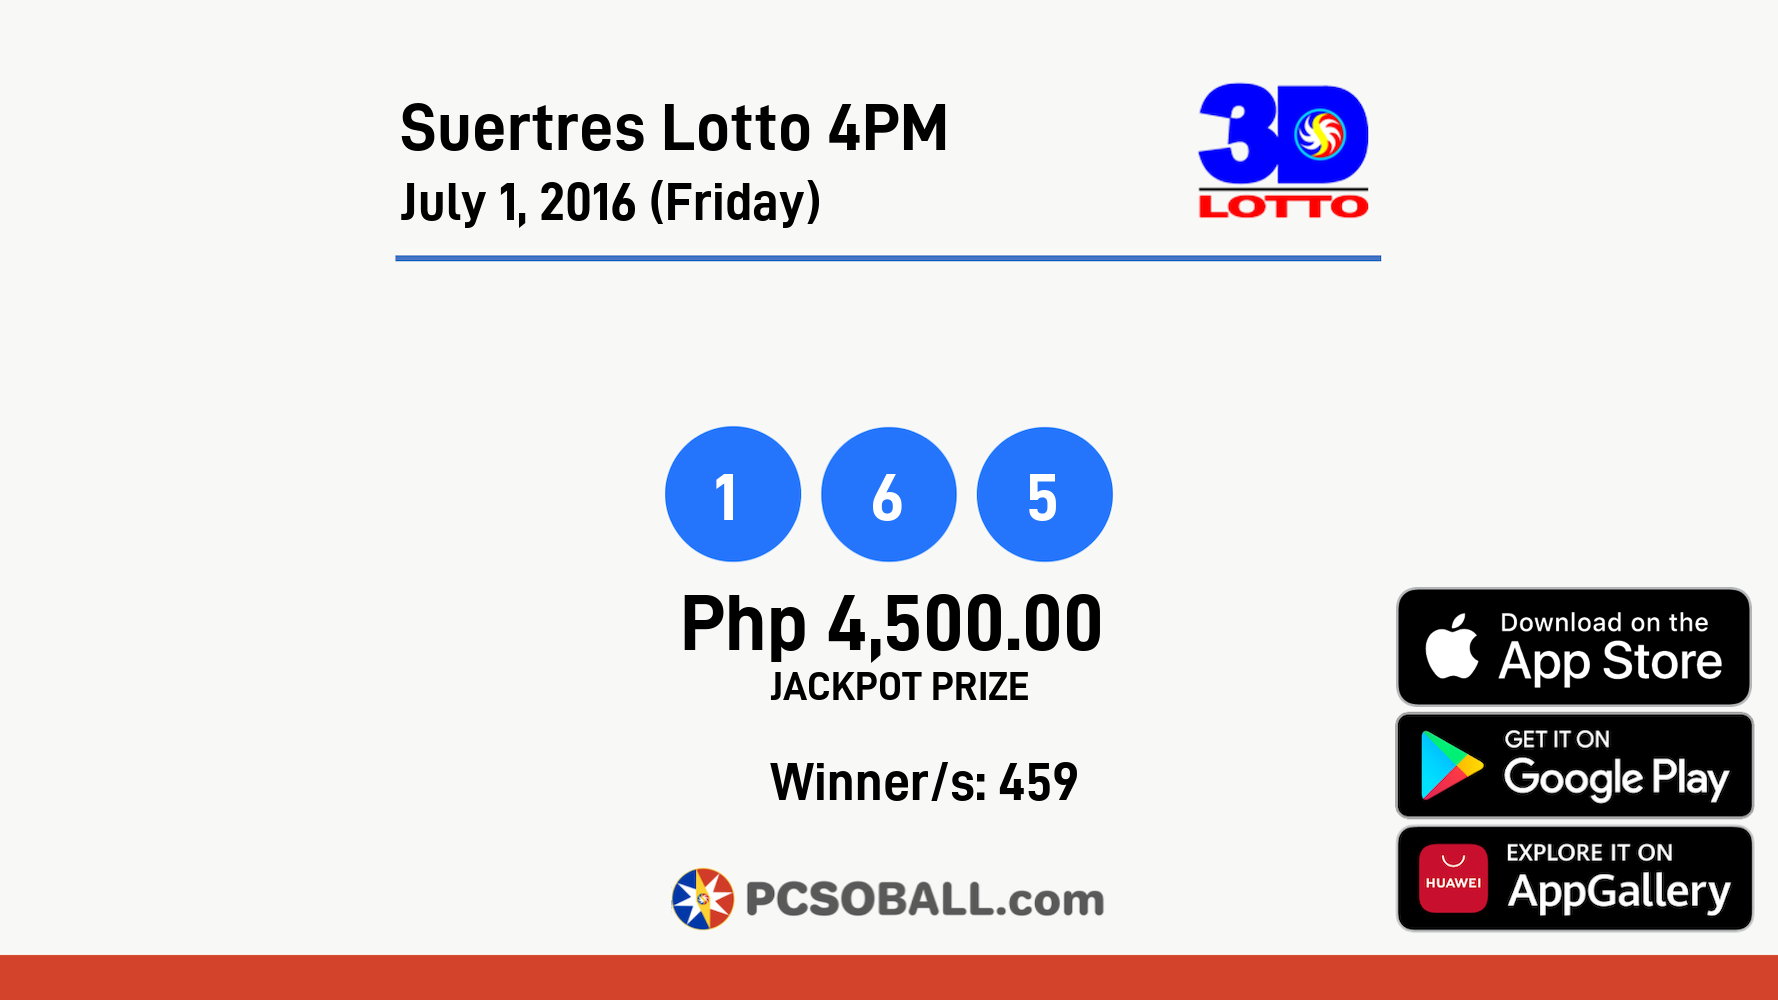 Suertres Lotto 4PM July 1, 2016 (Friday) Result